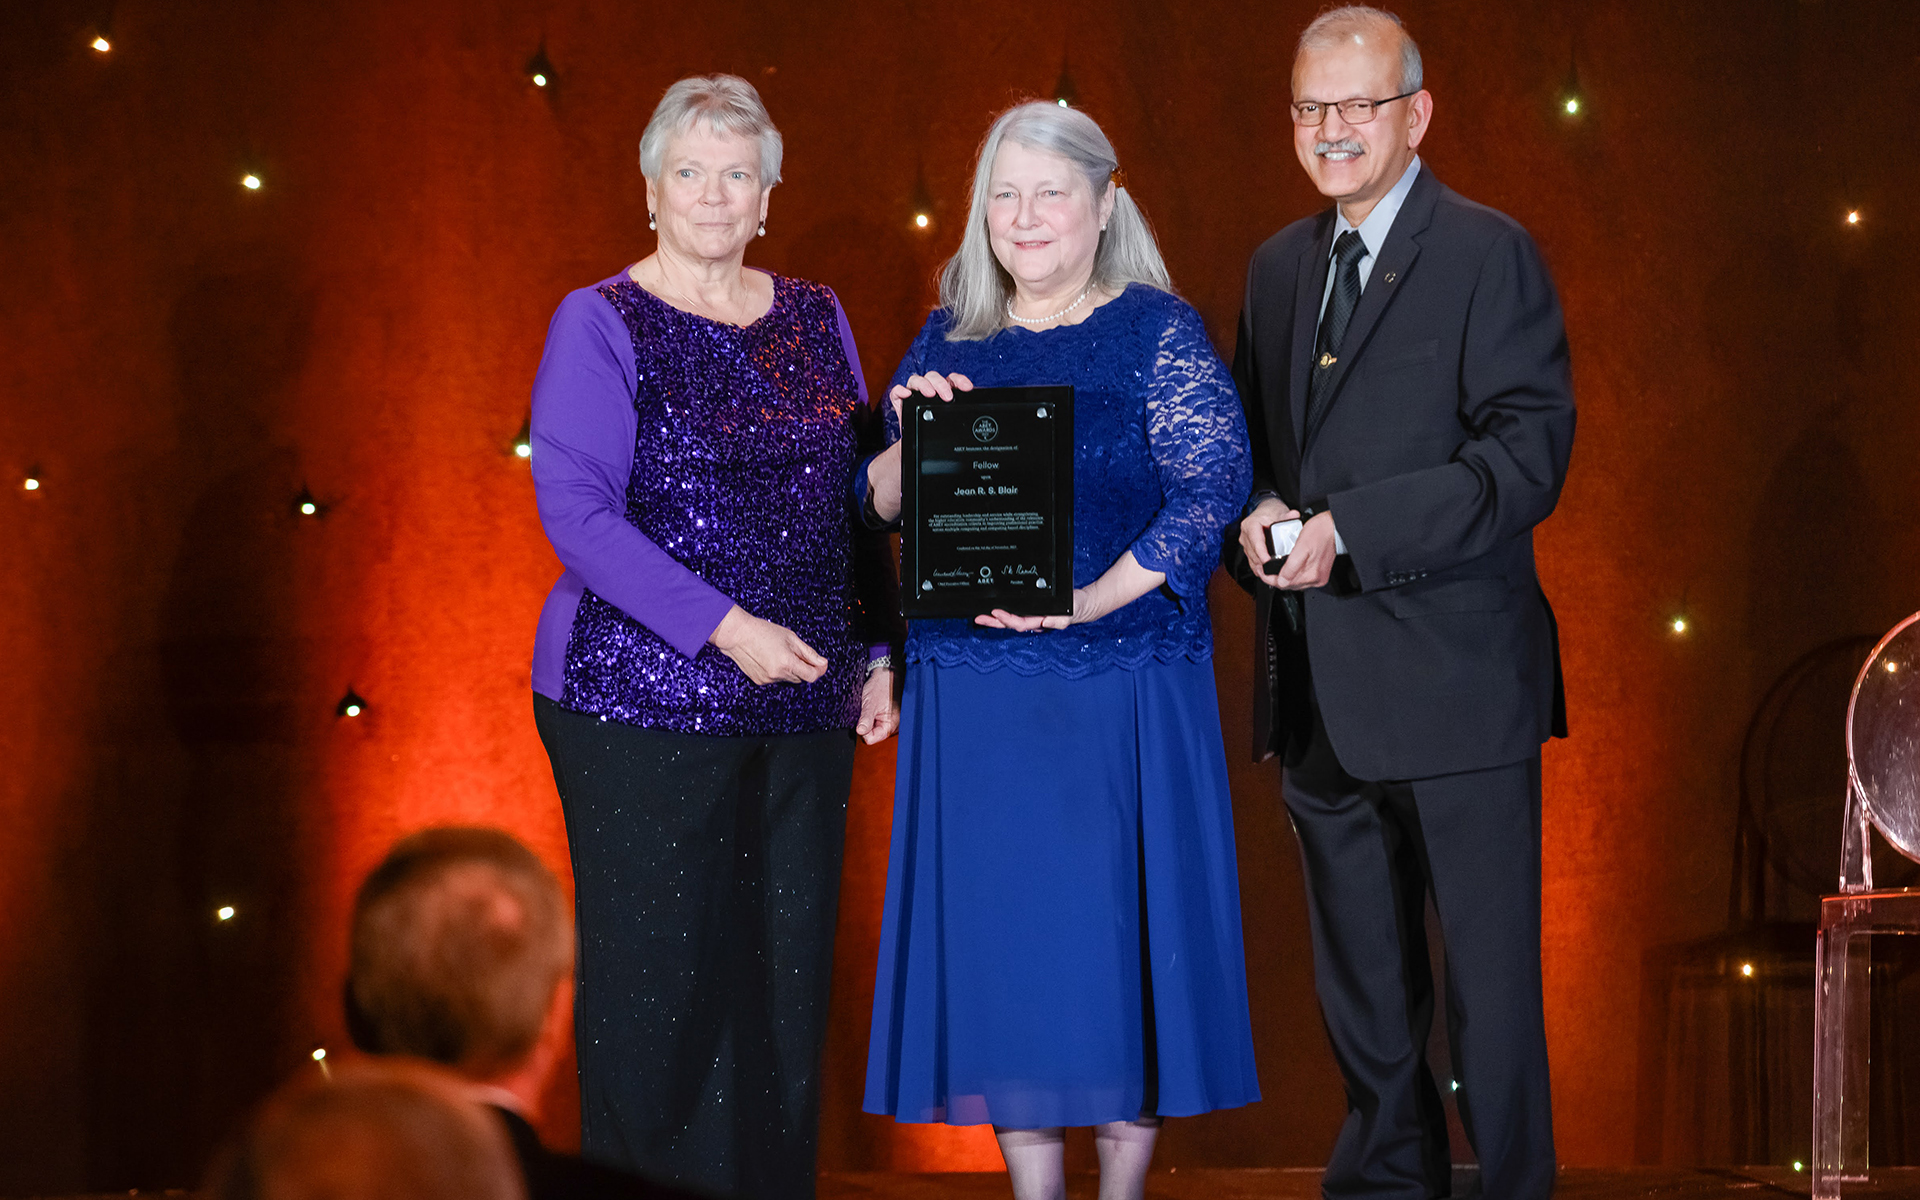 Two women and an older man standing on stage while the woman in the middle holds an award